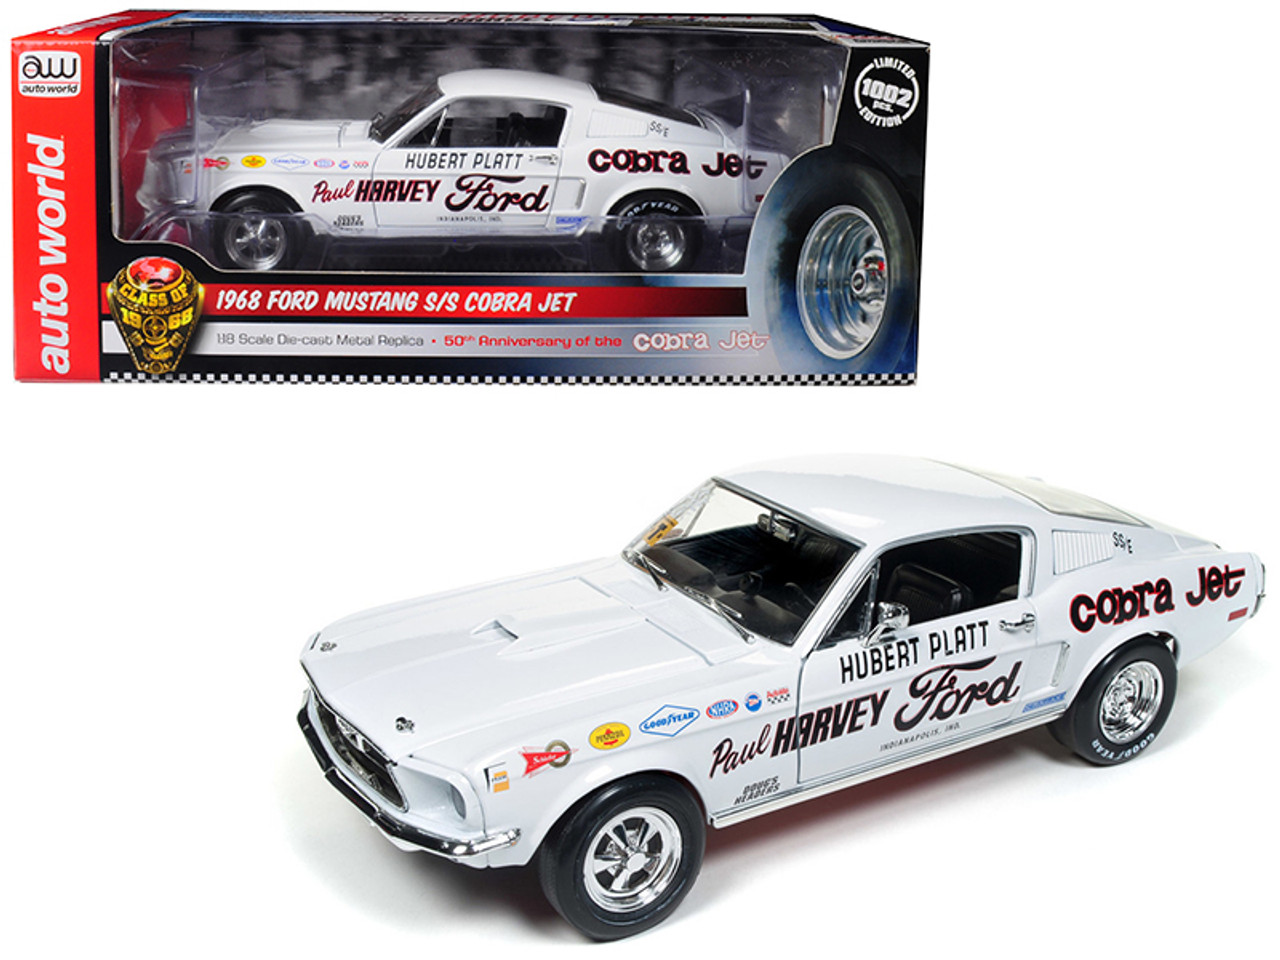 1968 Ford Mustang S/S Cobra Jet Hubert Platt "Class of 68" 50th Anniversary of the Ford Cobra Jet Limited Edition to 1002 pieces Worldwide 1/18 Diecast Model Car by Autoworld